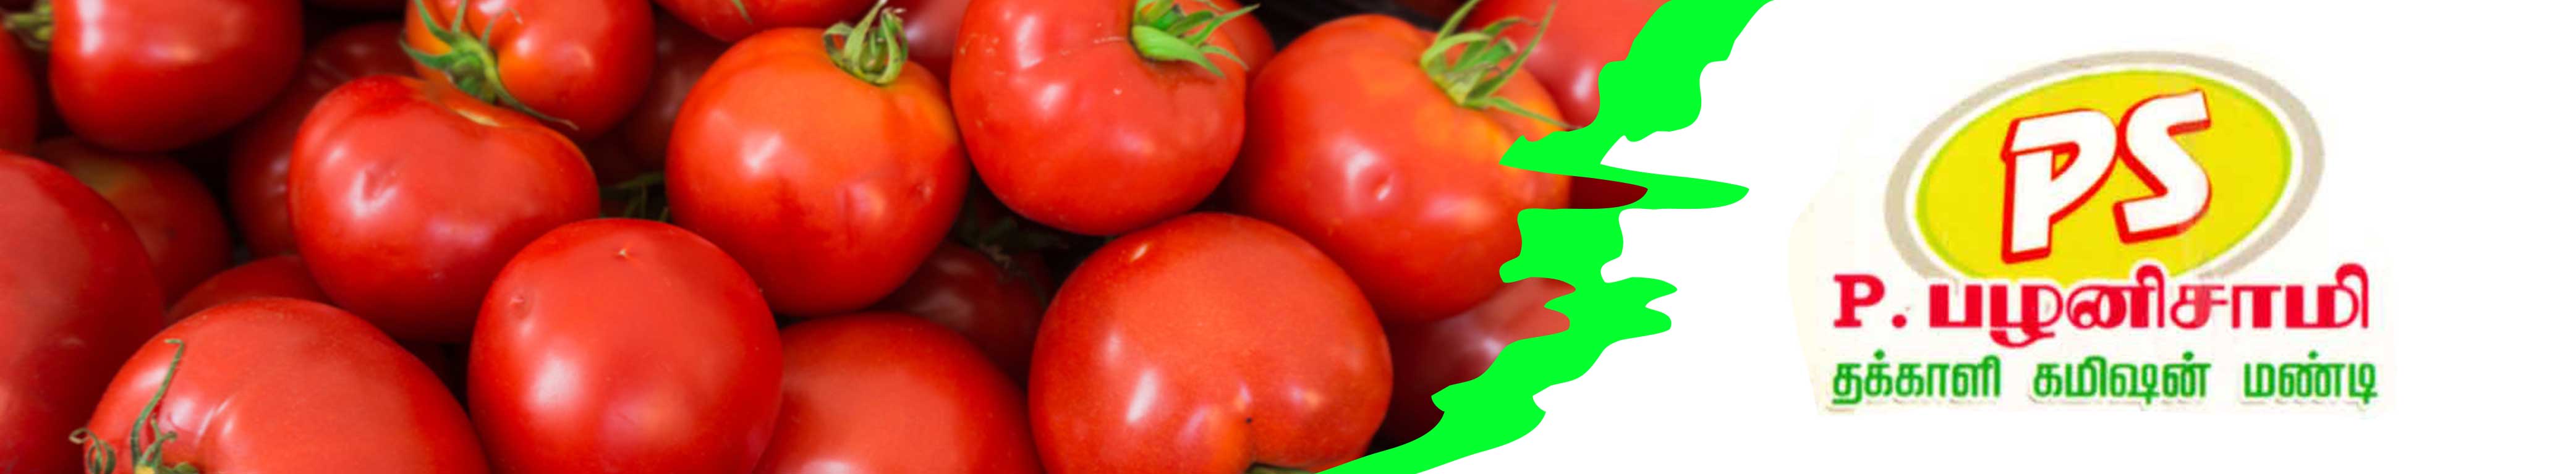 PS Tomato And Vegetables Wholesale Banner Image